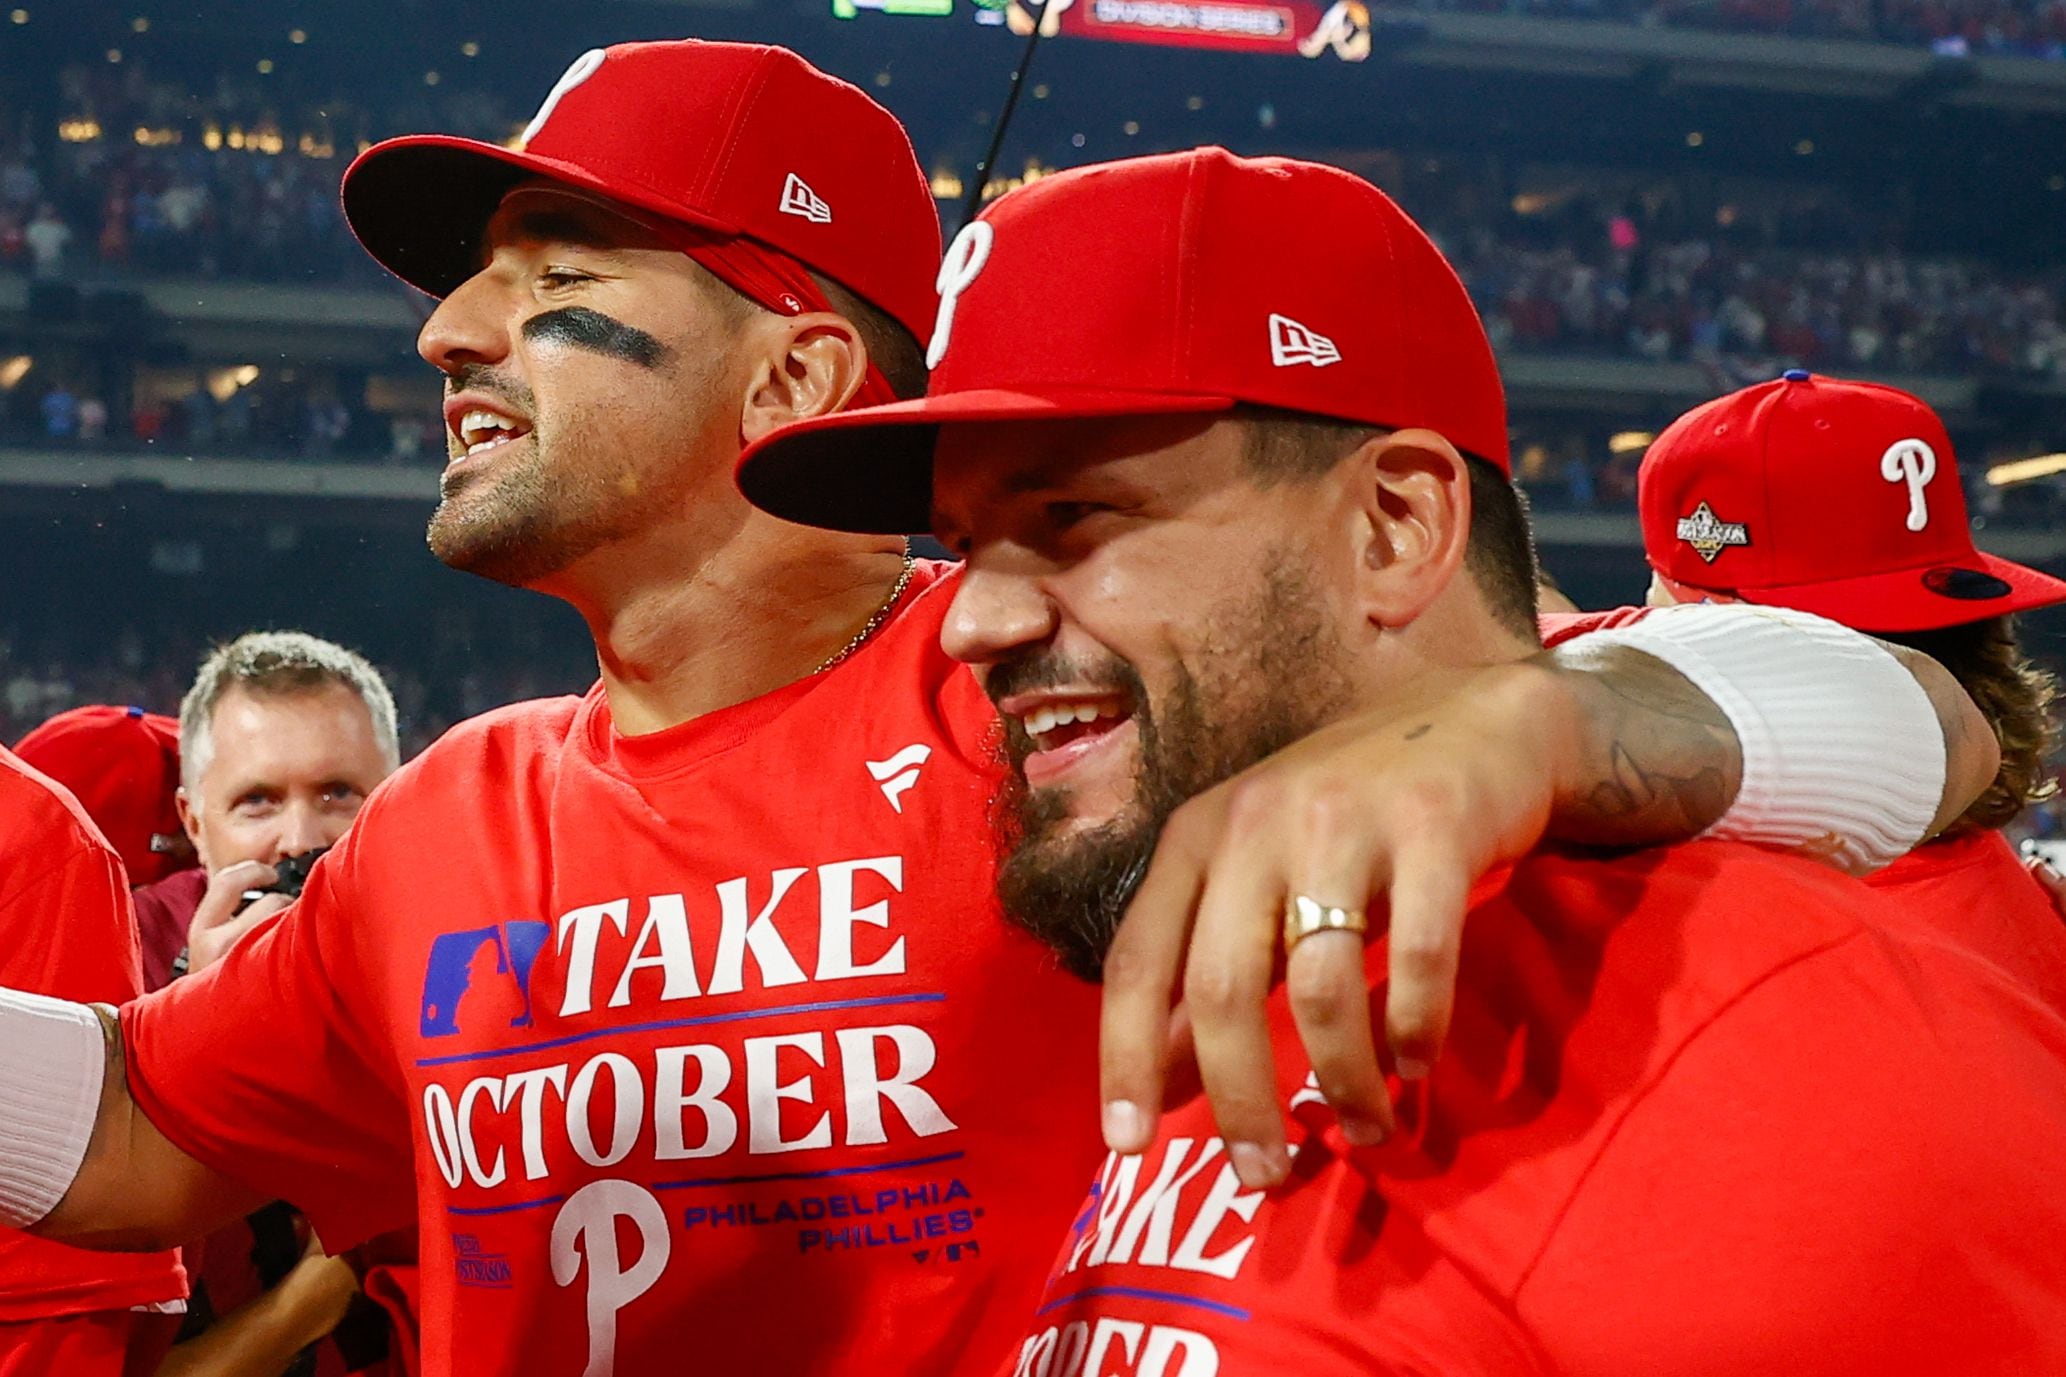 Phillies NLCS tickets: The cheapest tickets available for